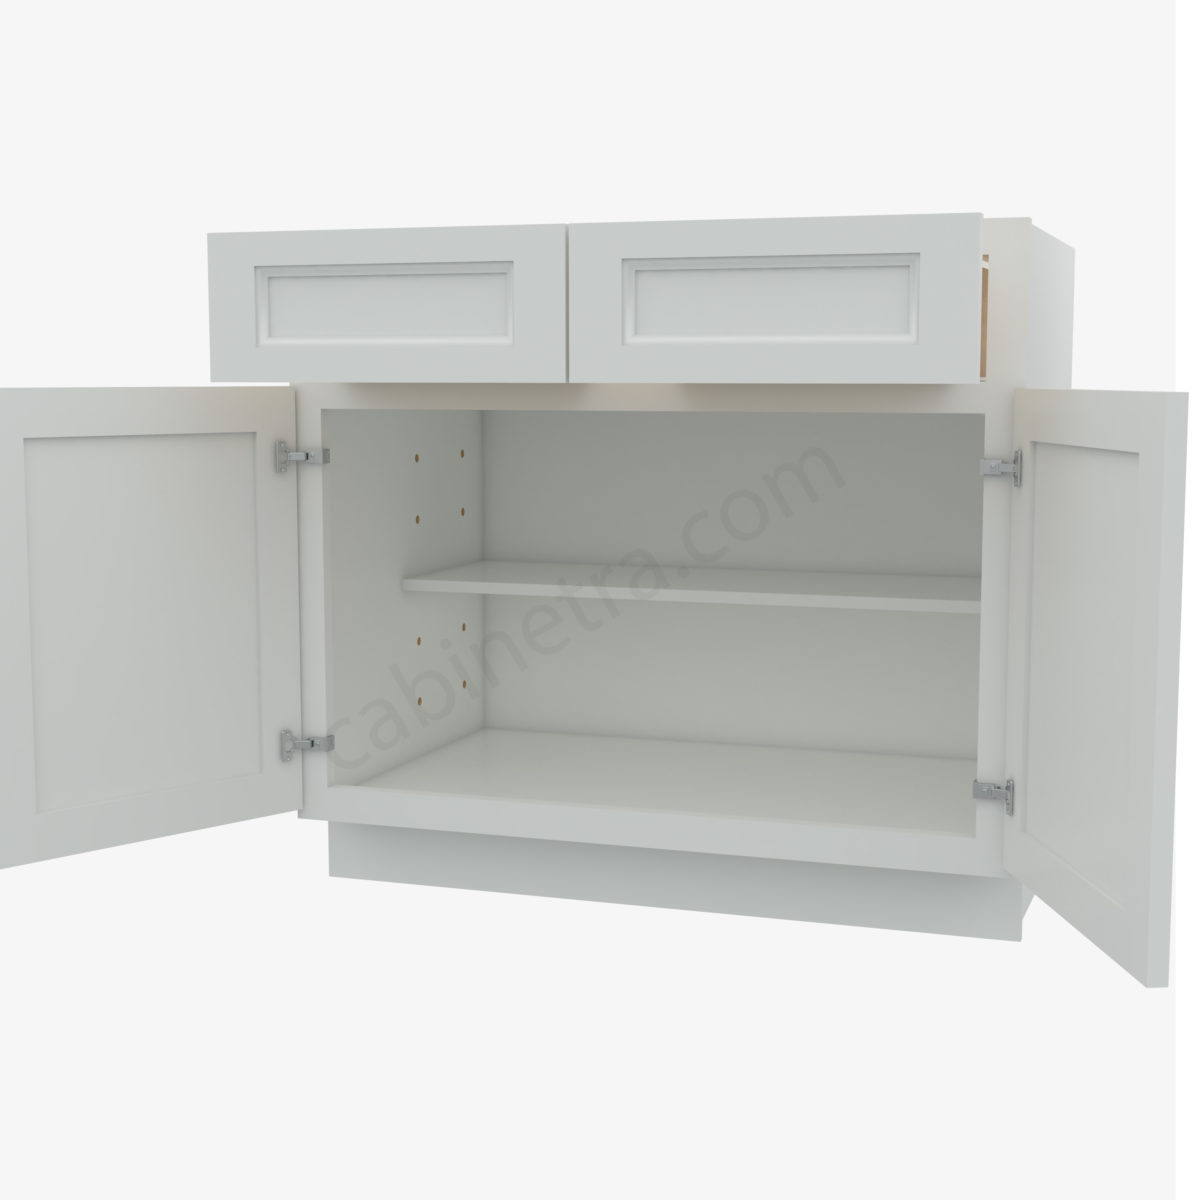 TW B36B 5 Forevermark Uptown White Cabinetra scaled